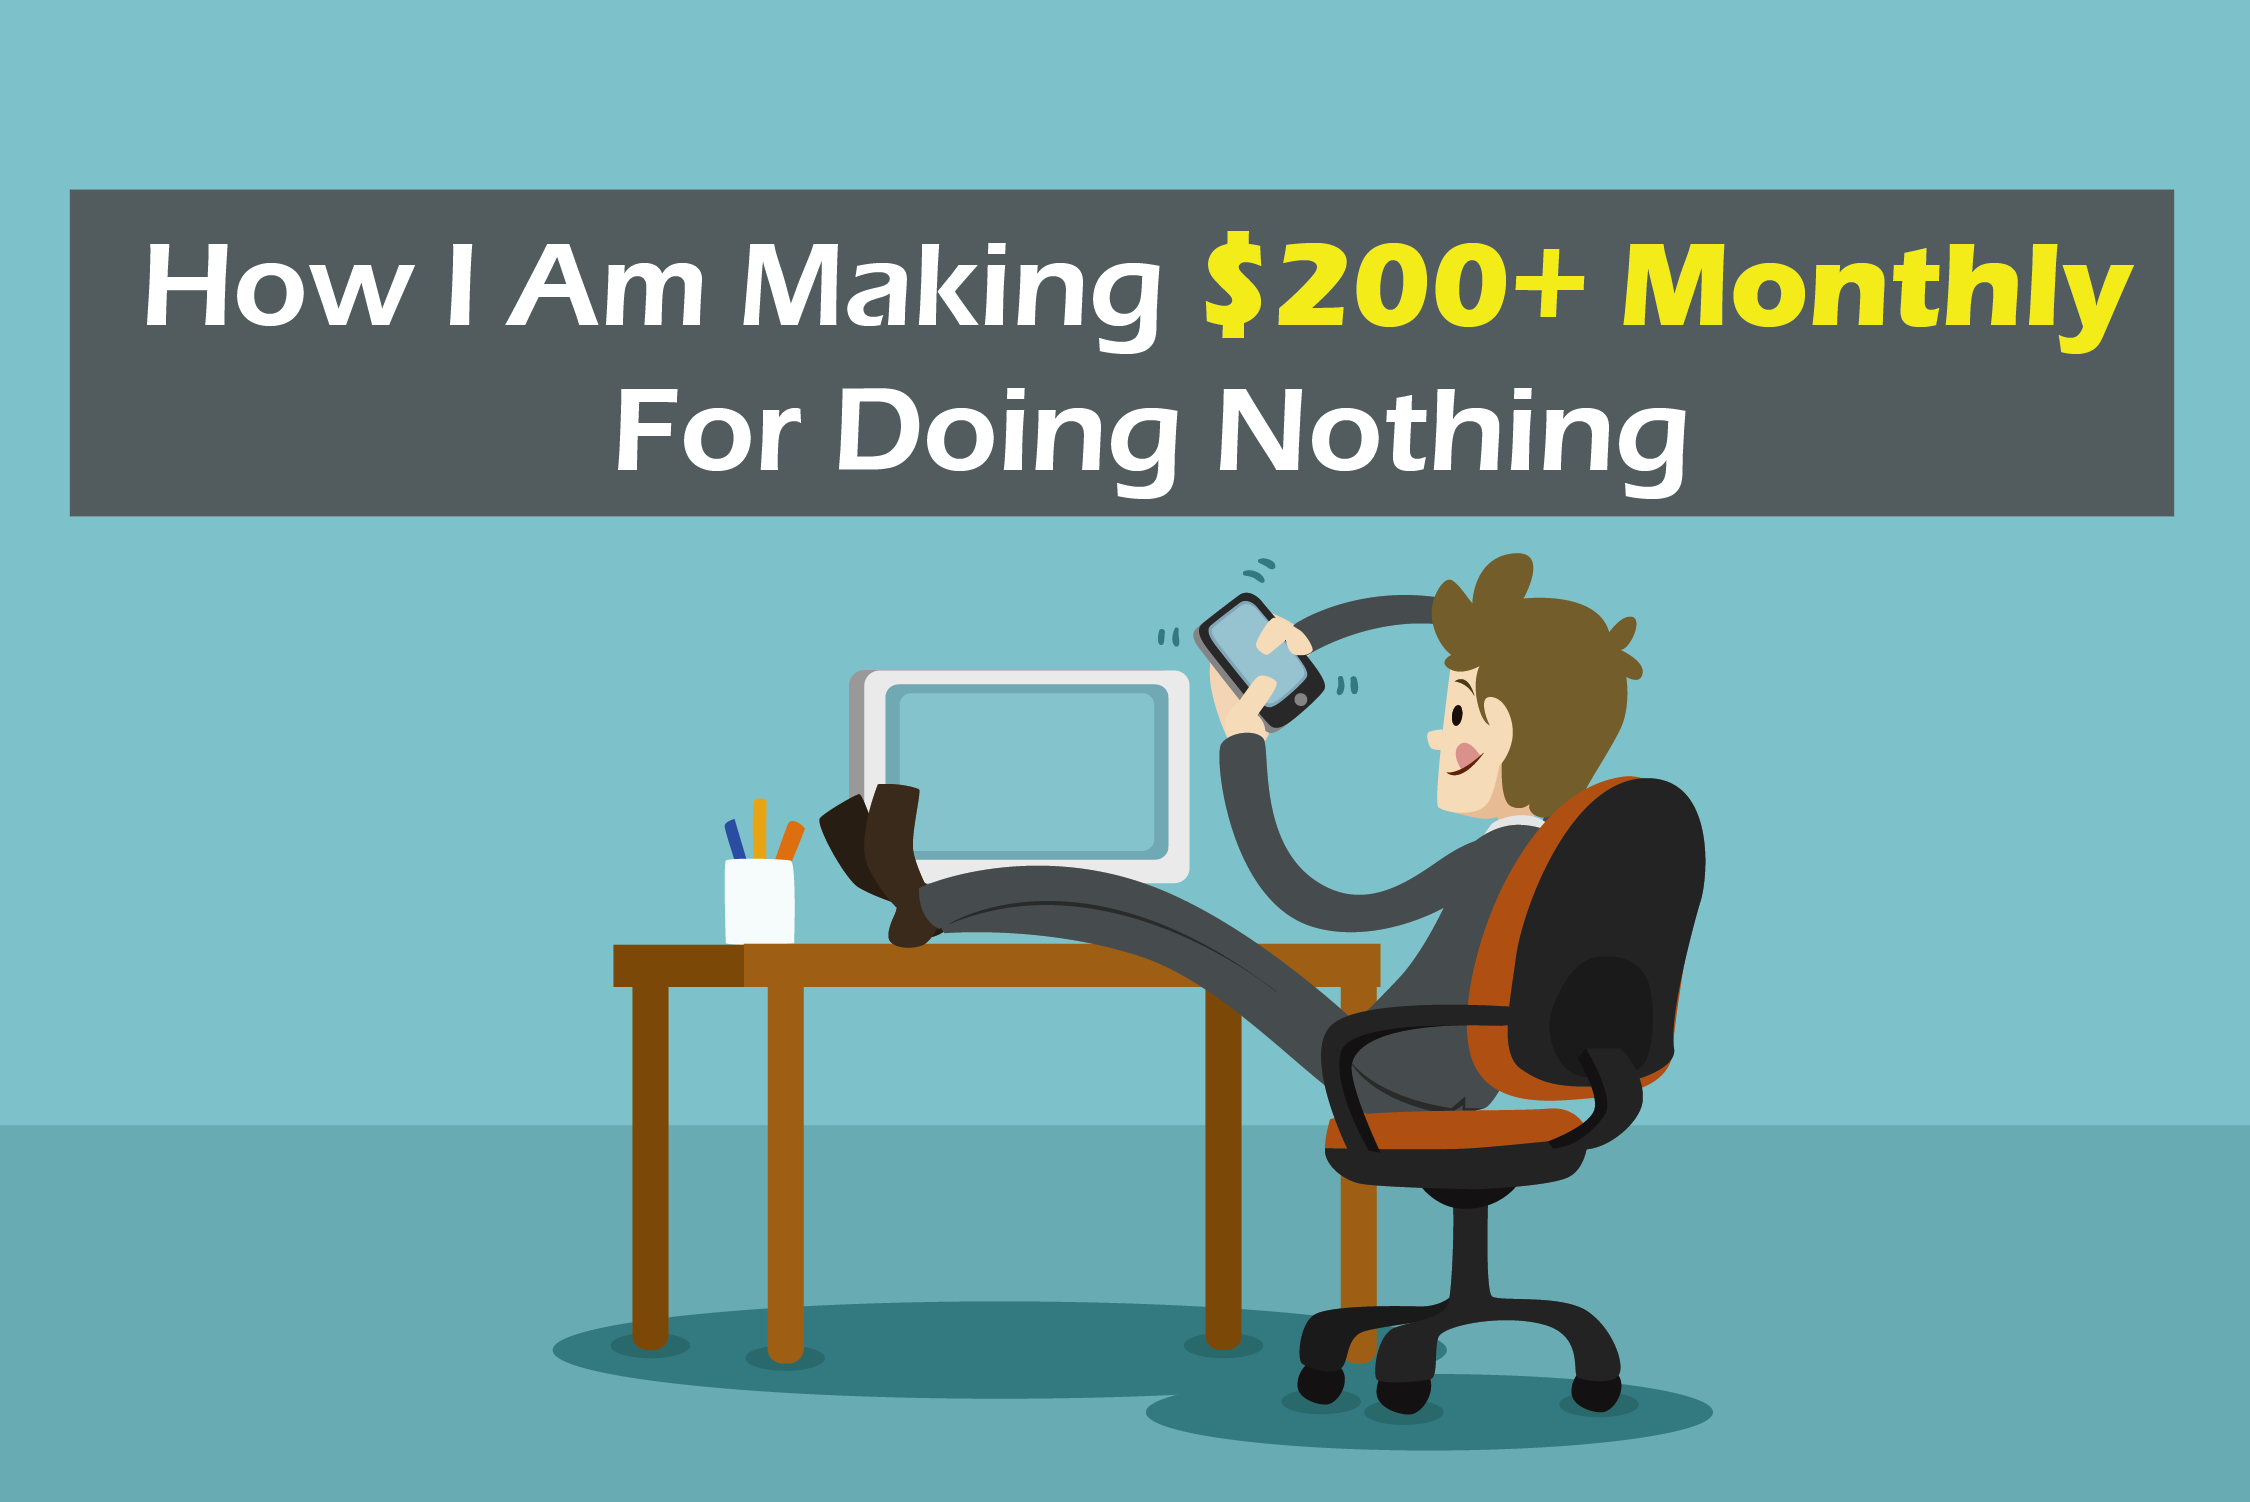 How I am making $200 Monthly for Doing Nothing